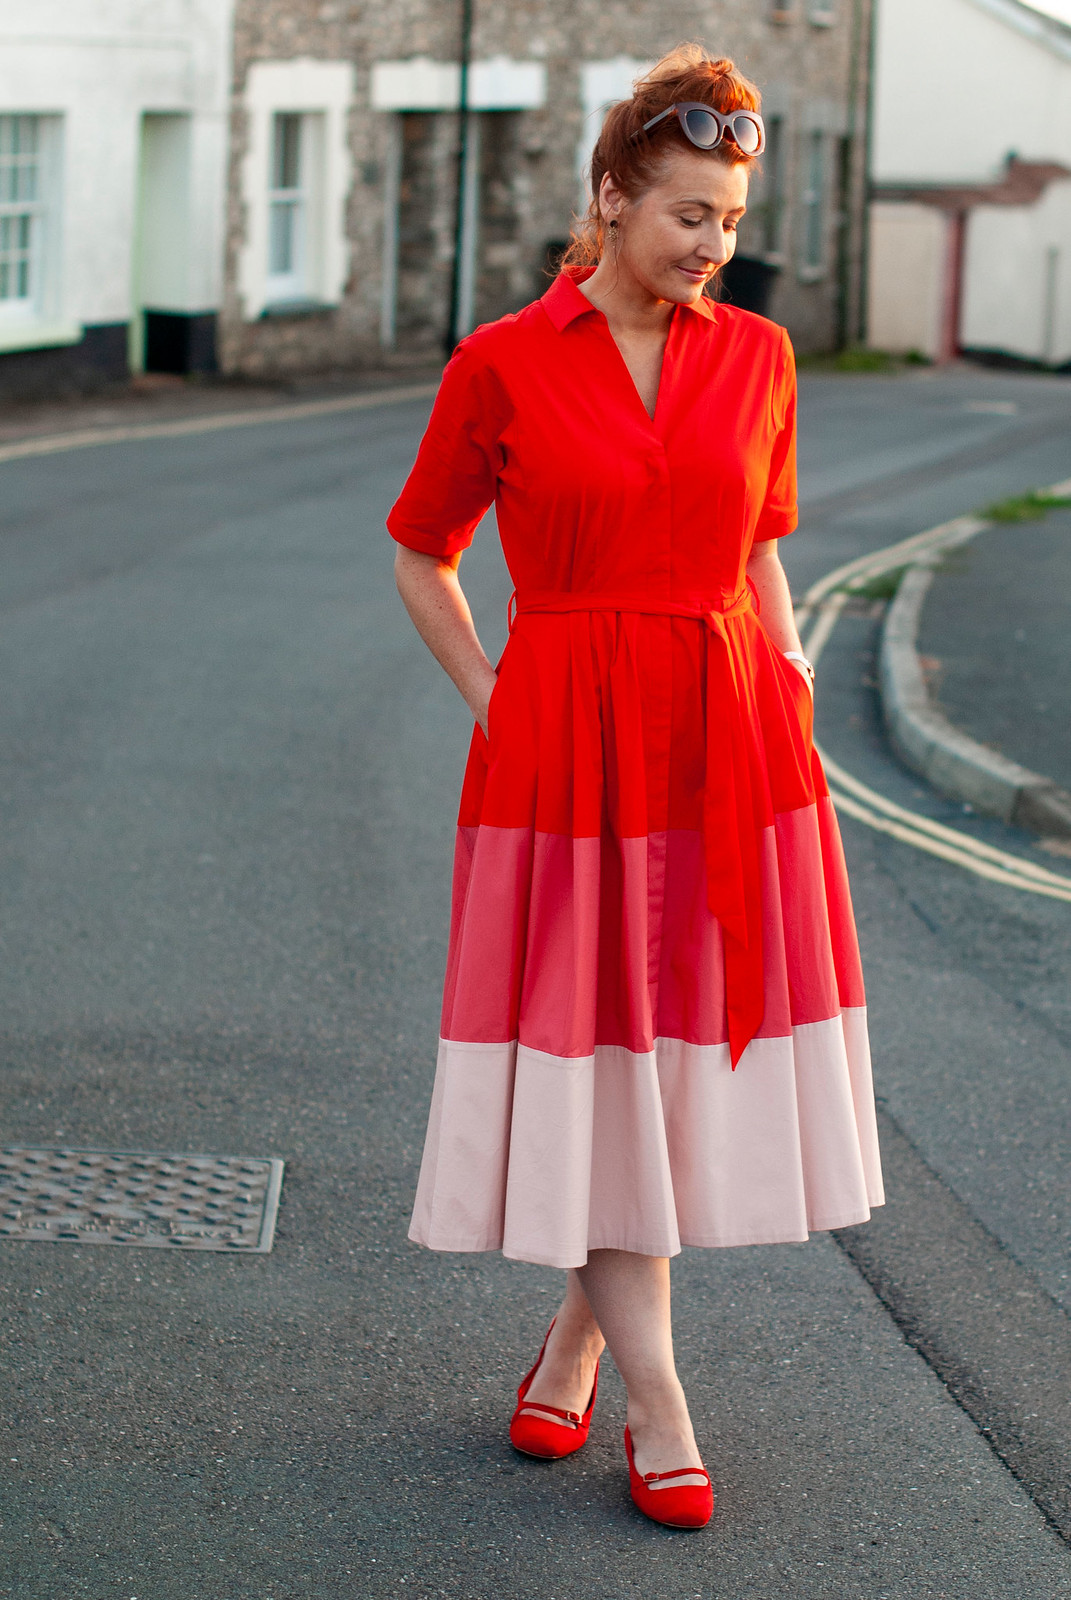 The Perfect Bold, Smart Summer Dress: A Red Ombré Shirt Dress | Not Dressed As Lamb, fashion for women over 40